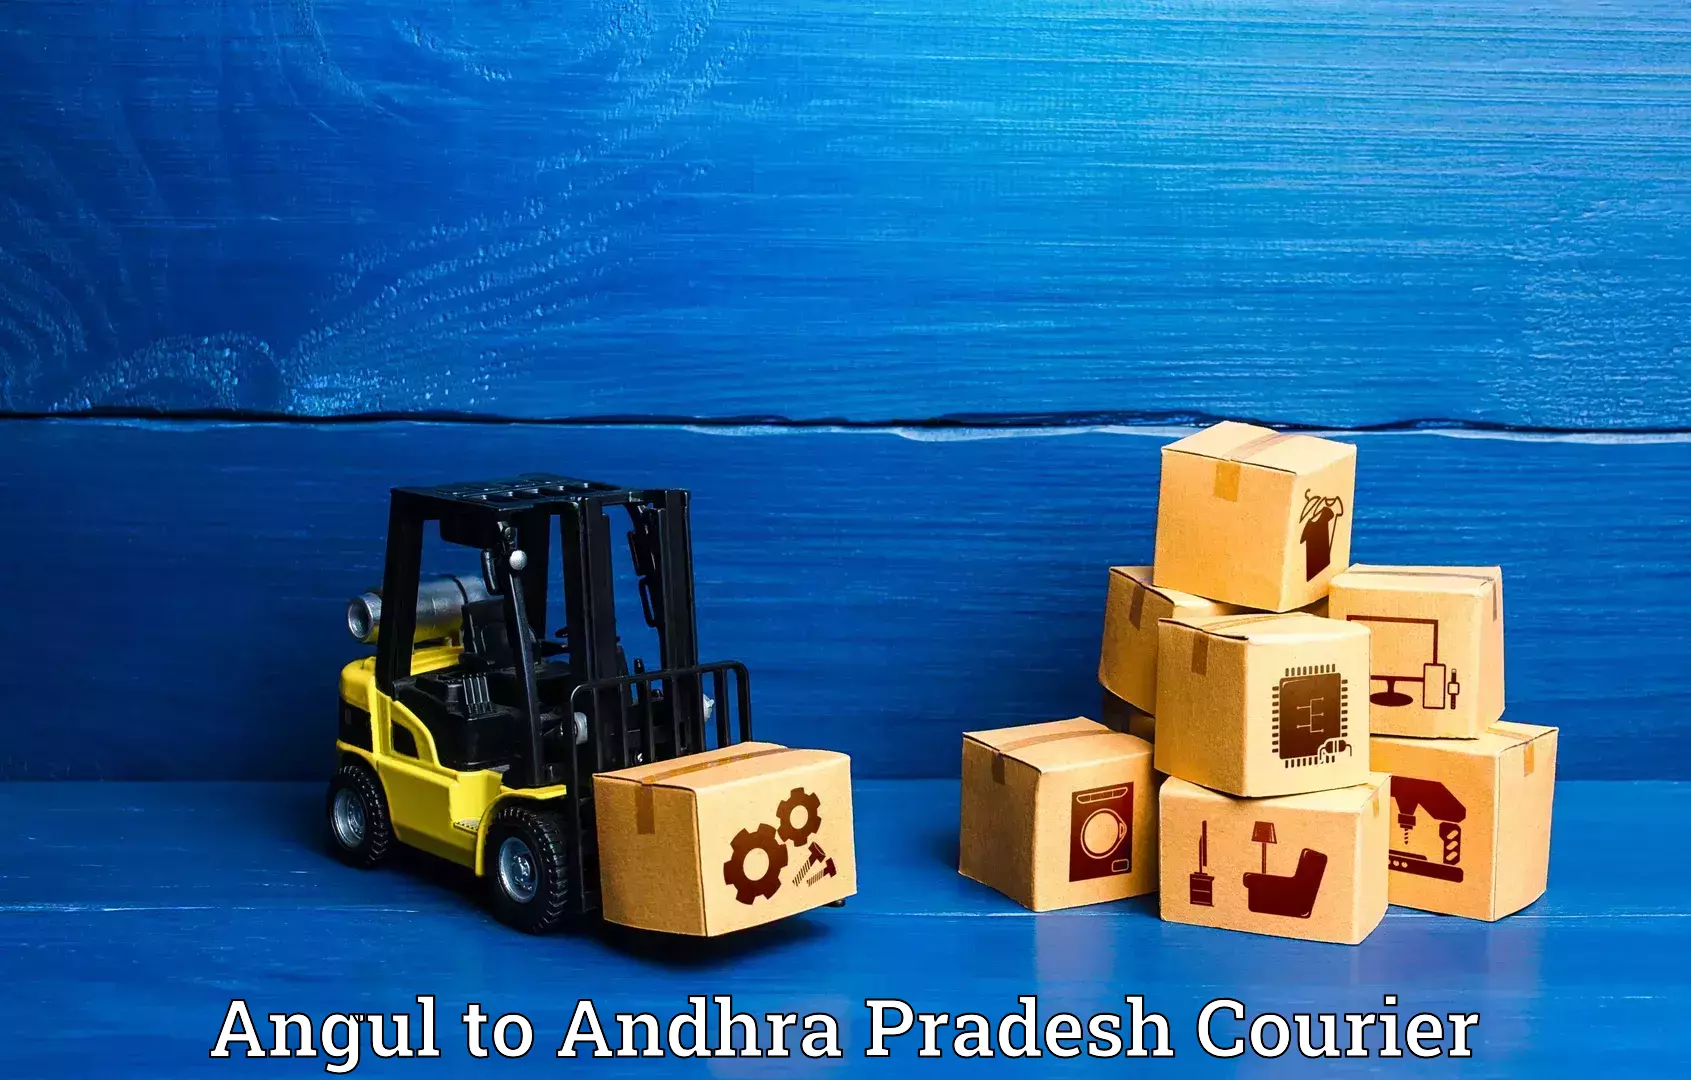 Baggage transport technology Angul to Dhone